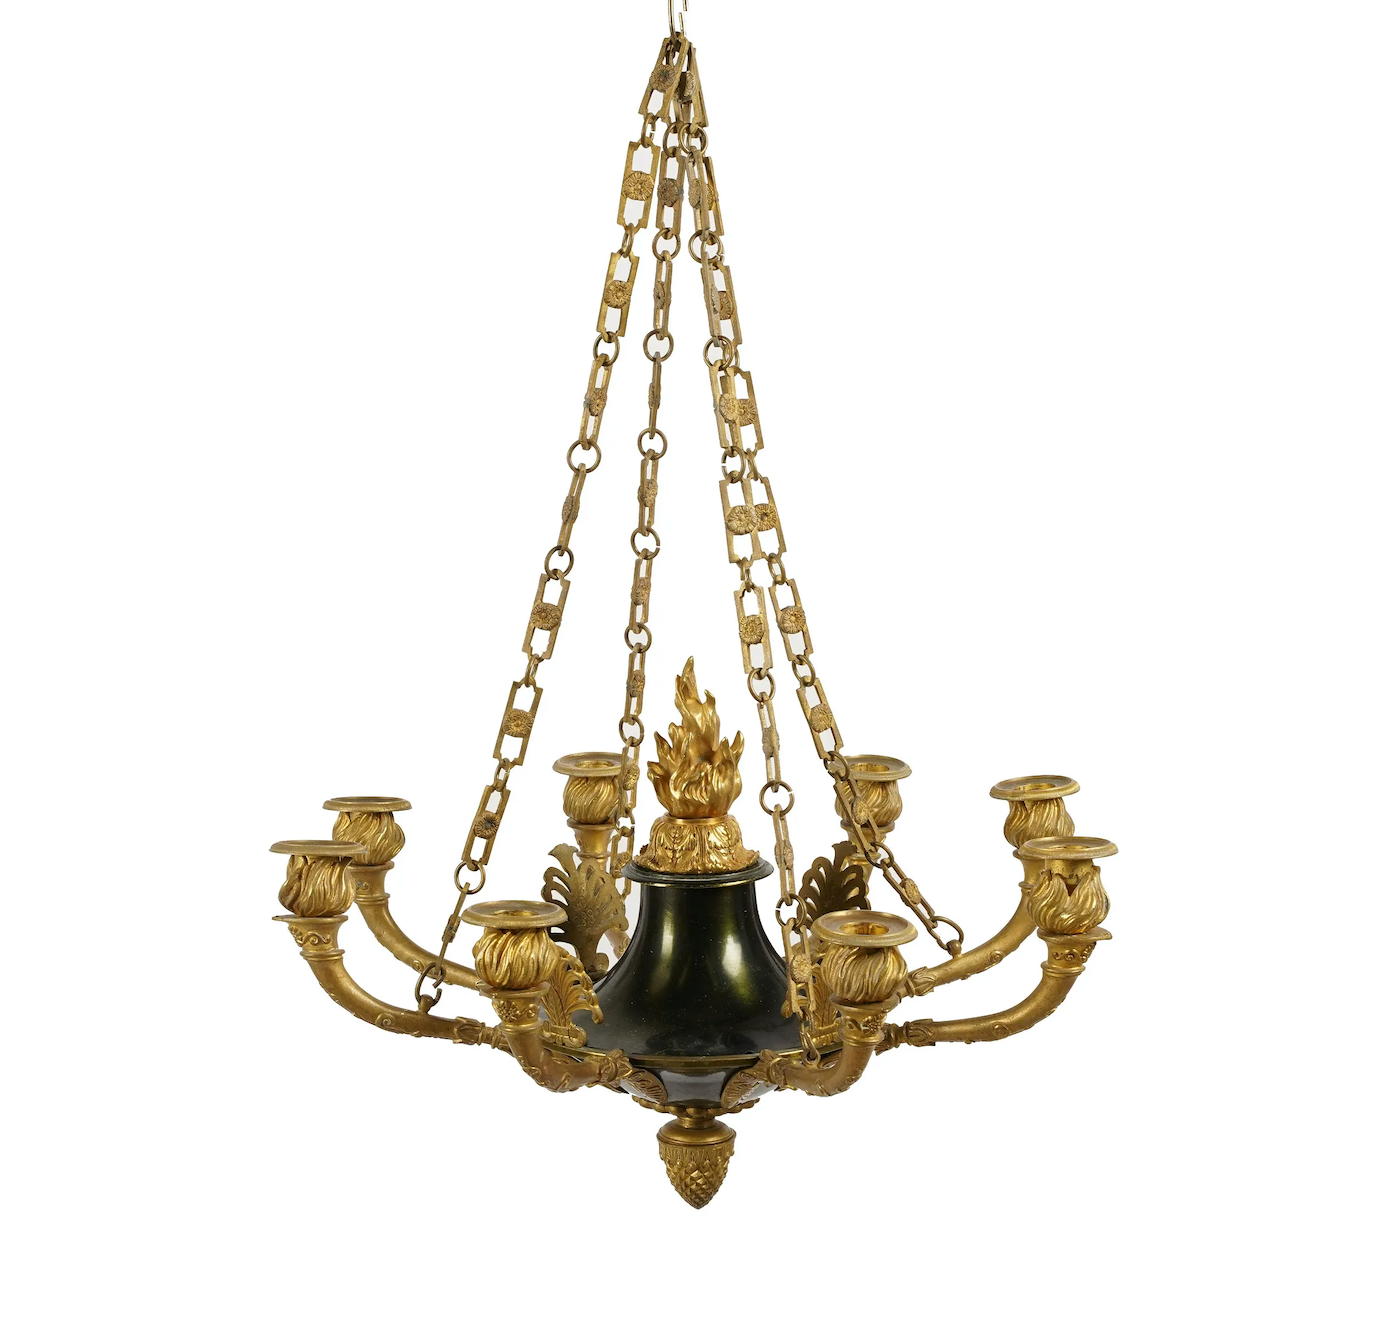 AL1-061: EARLY 20TH CENTURY FRENCH EMPIRE STYLE GILT METAL 8 LIGHT CHANDELIER